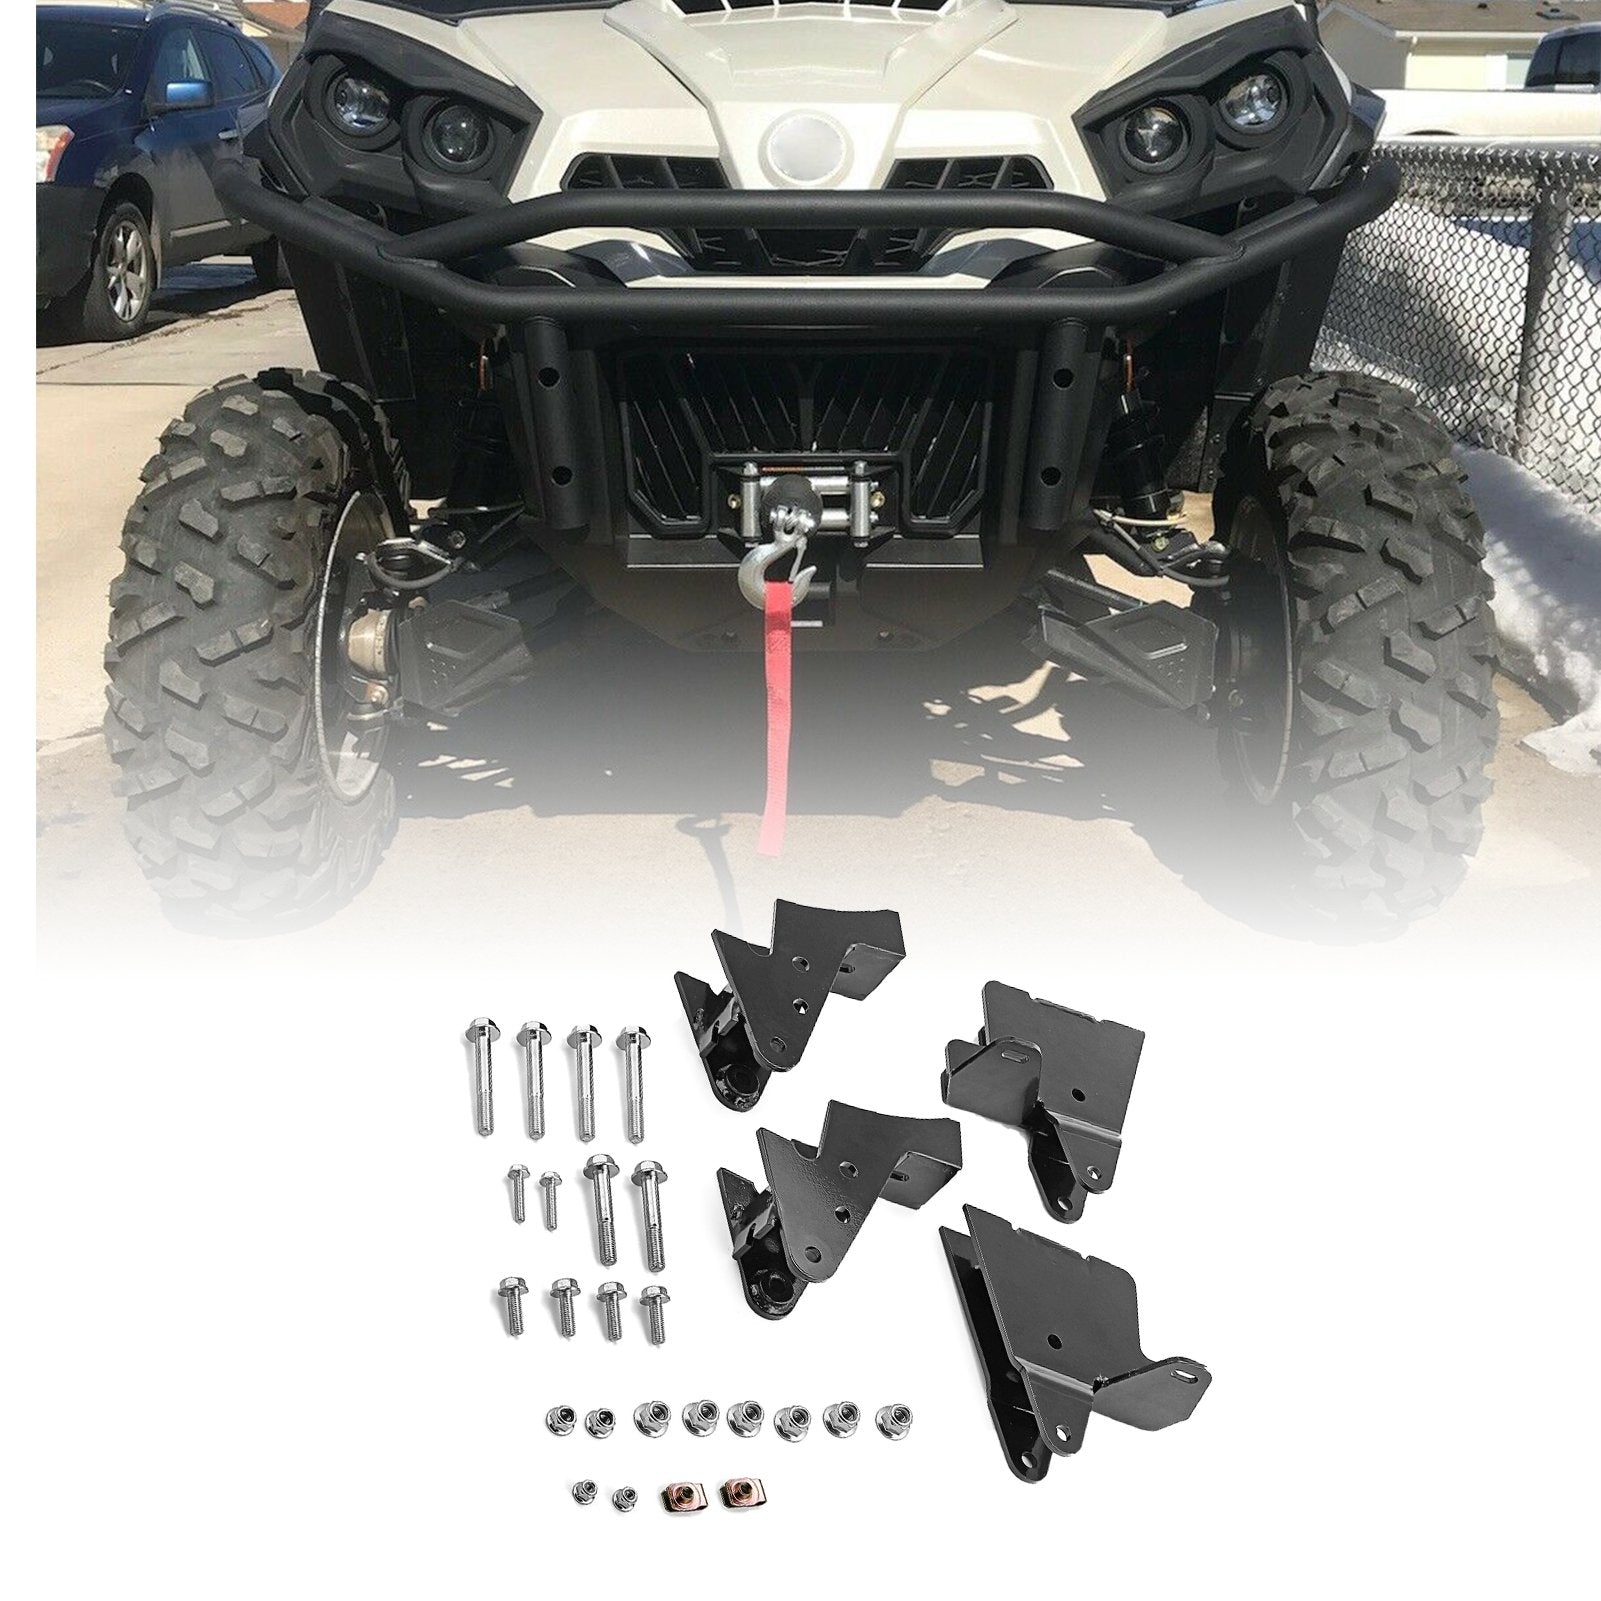 2011+ Can-Am Commander Max 800 1000 2.5" Full Lift Suspension Complete Kit - Weisen